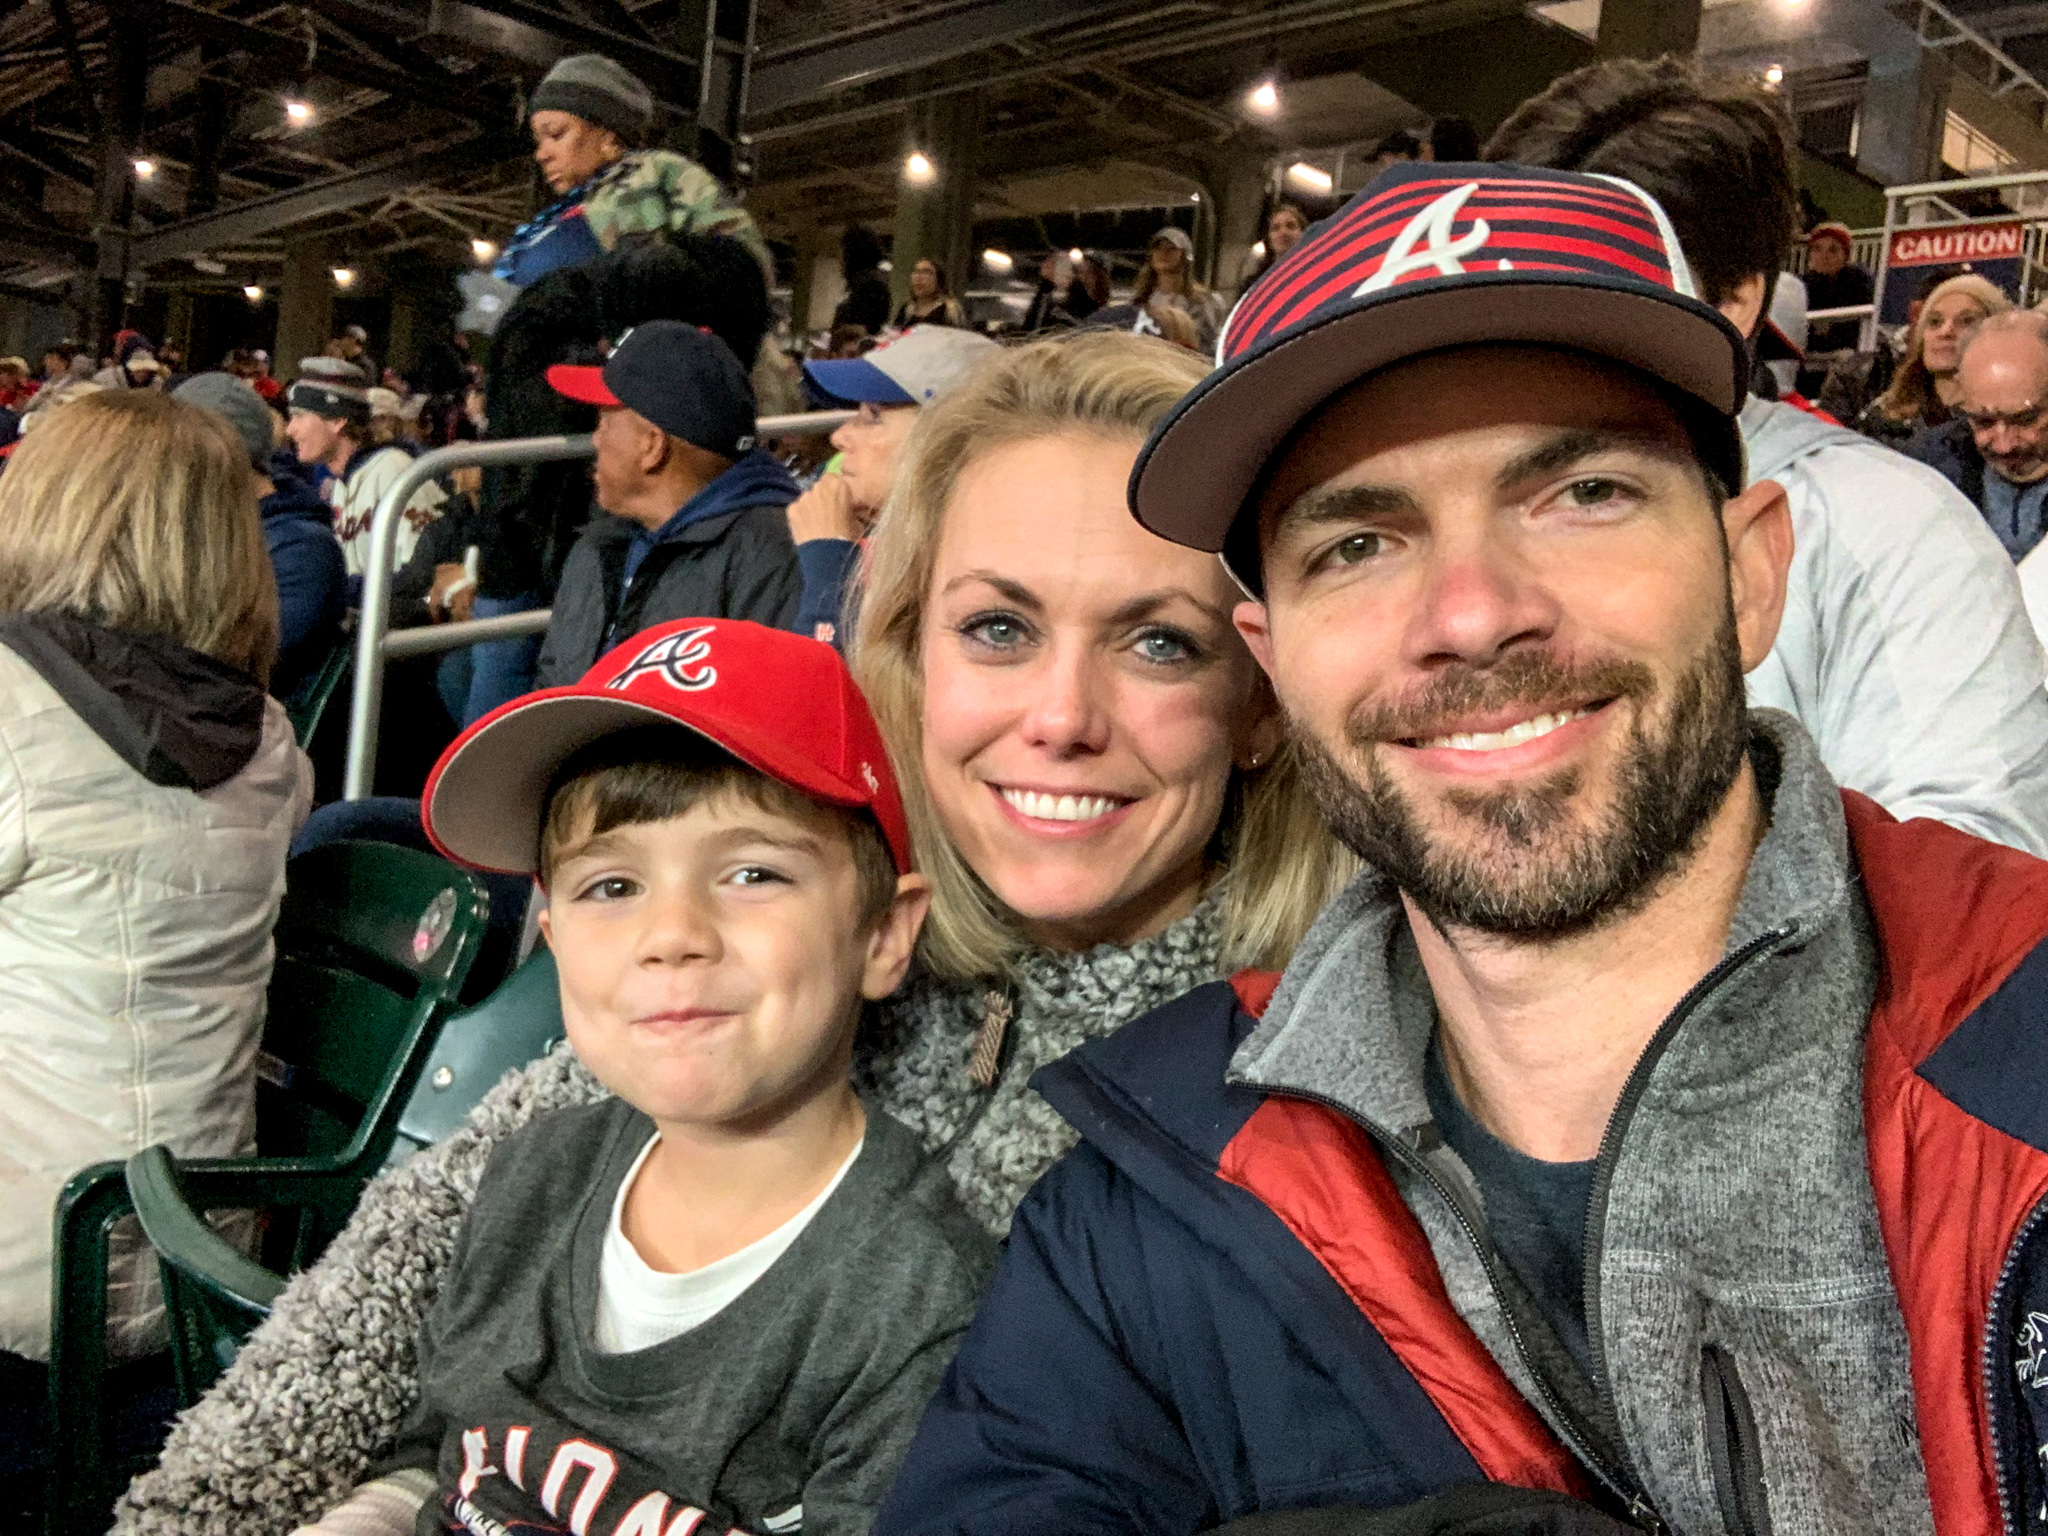 Chase Swanson: Watching My Brother Dansby Win the World Series